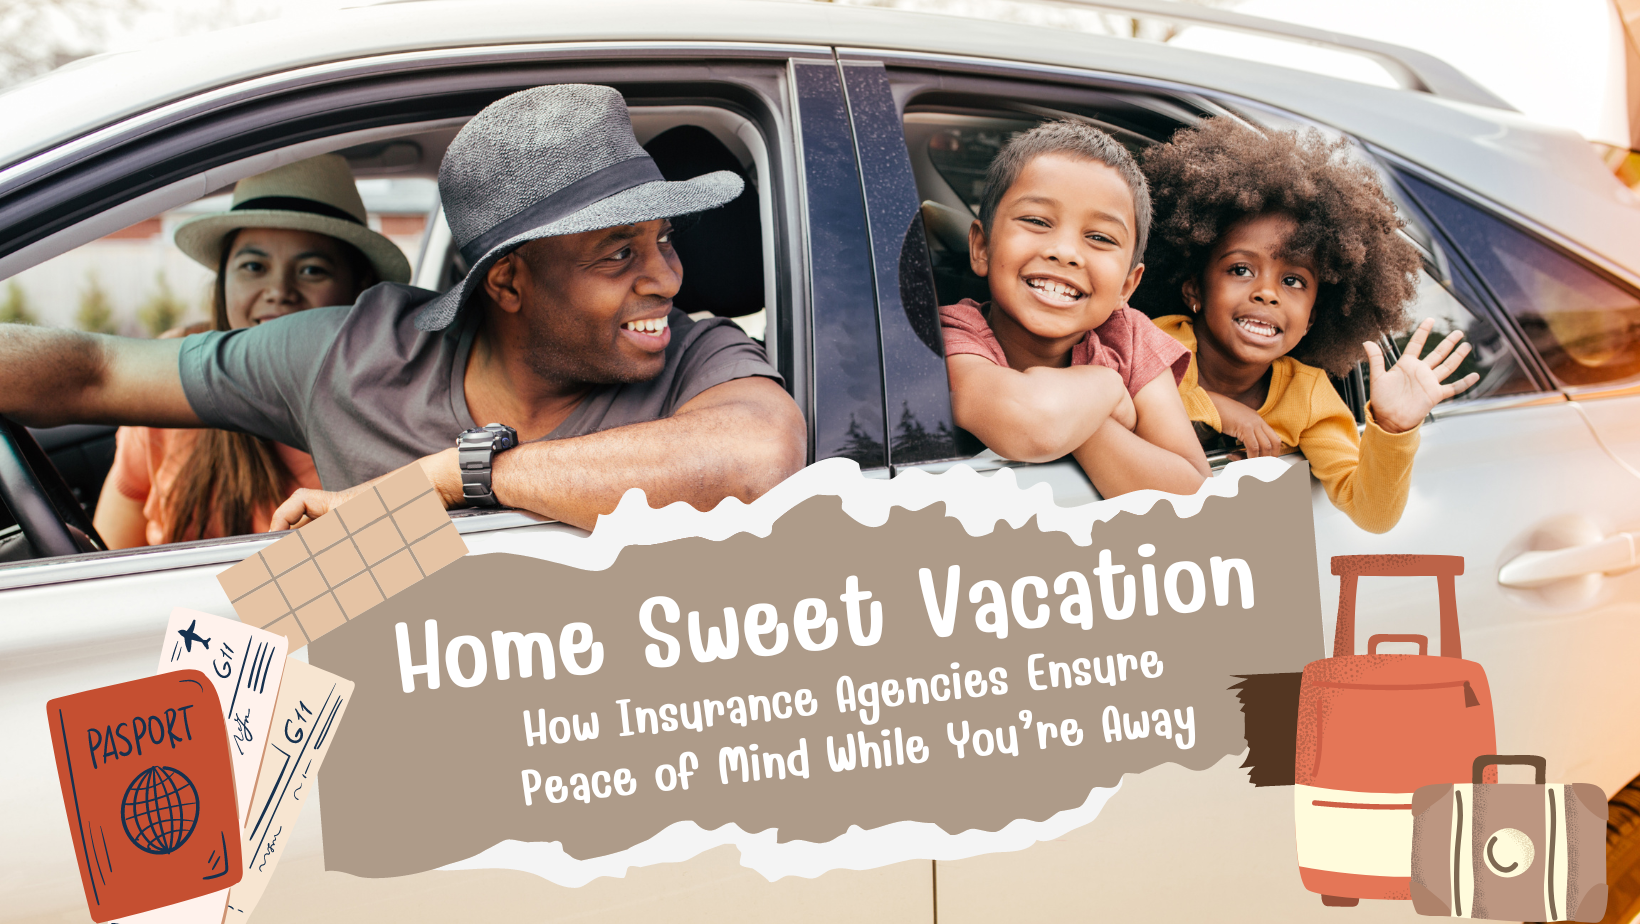 Home Sweet Vacation: How Insurance Agencies Ensure Peace of Mind While You're Away